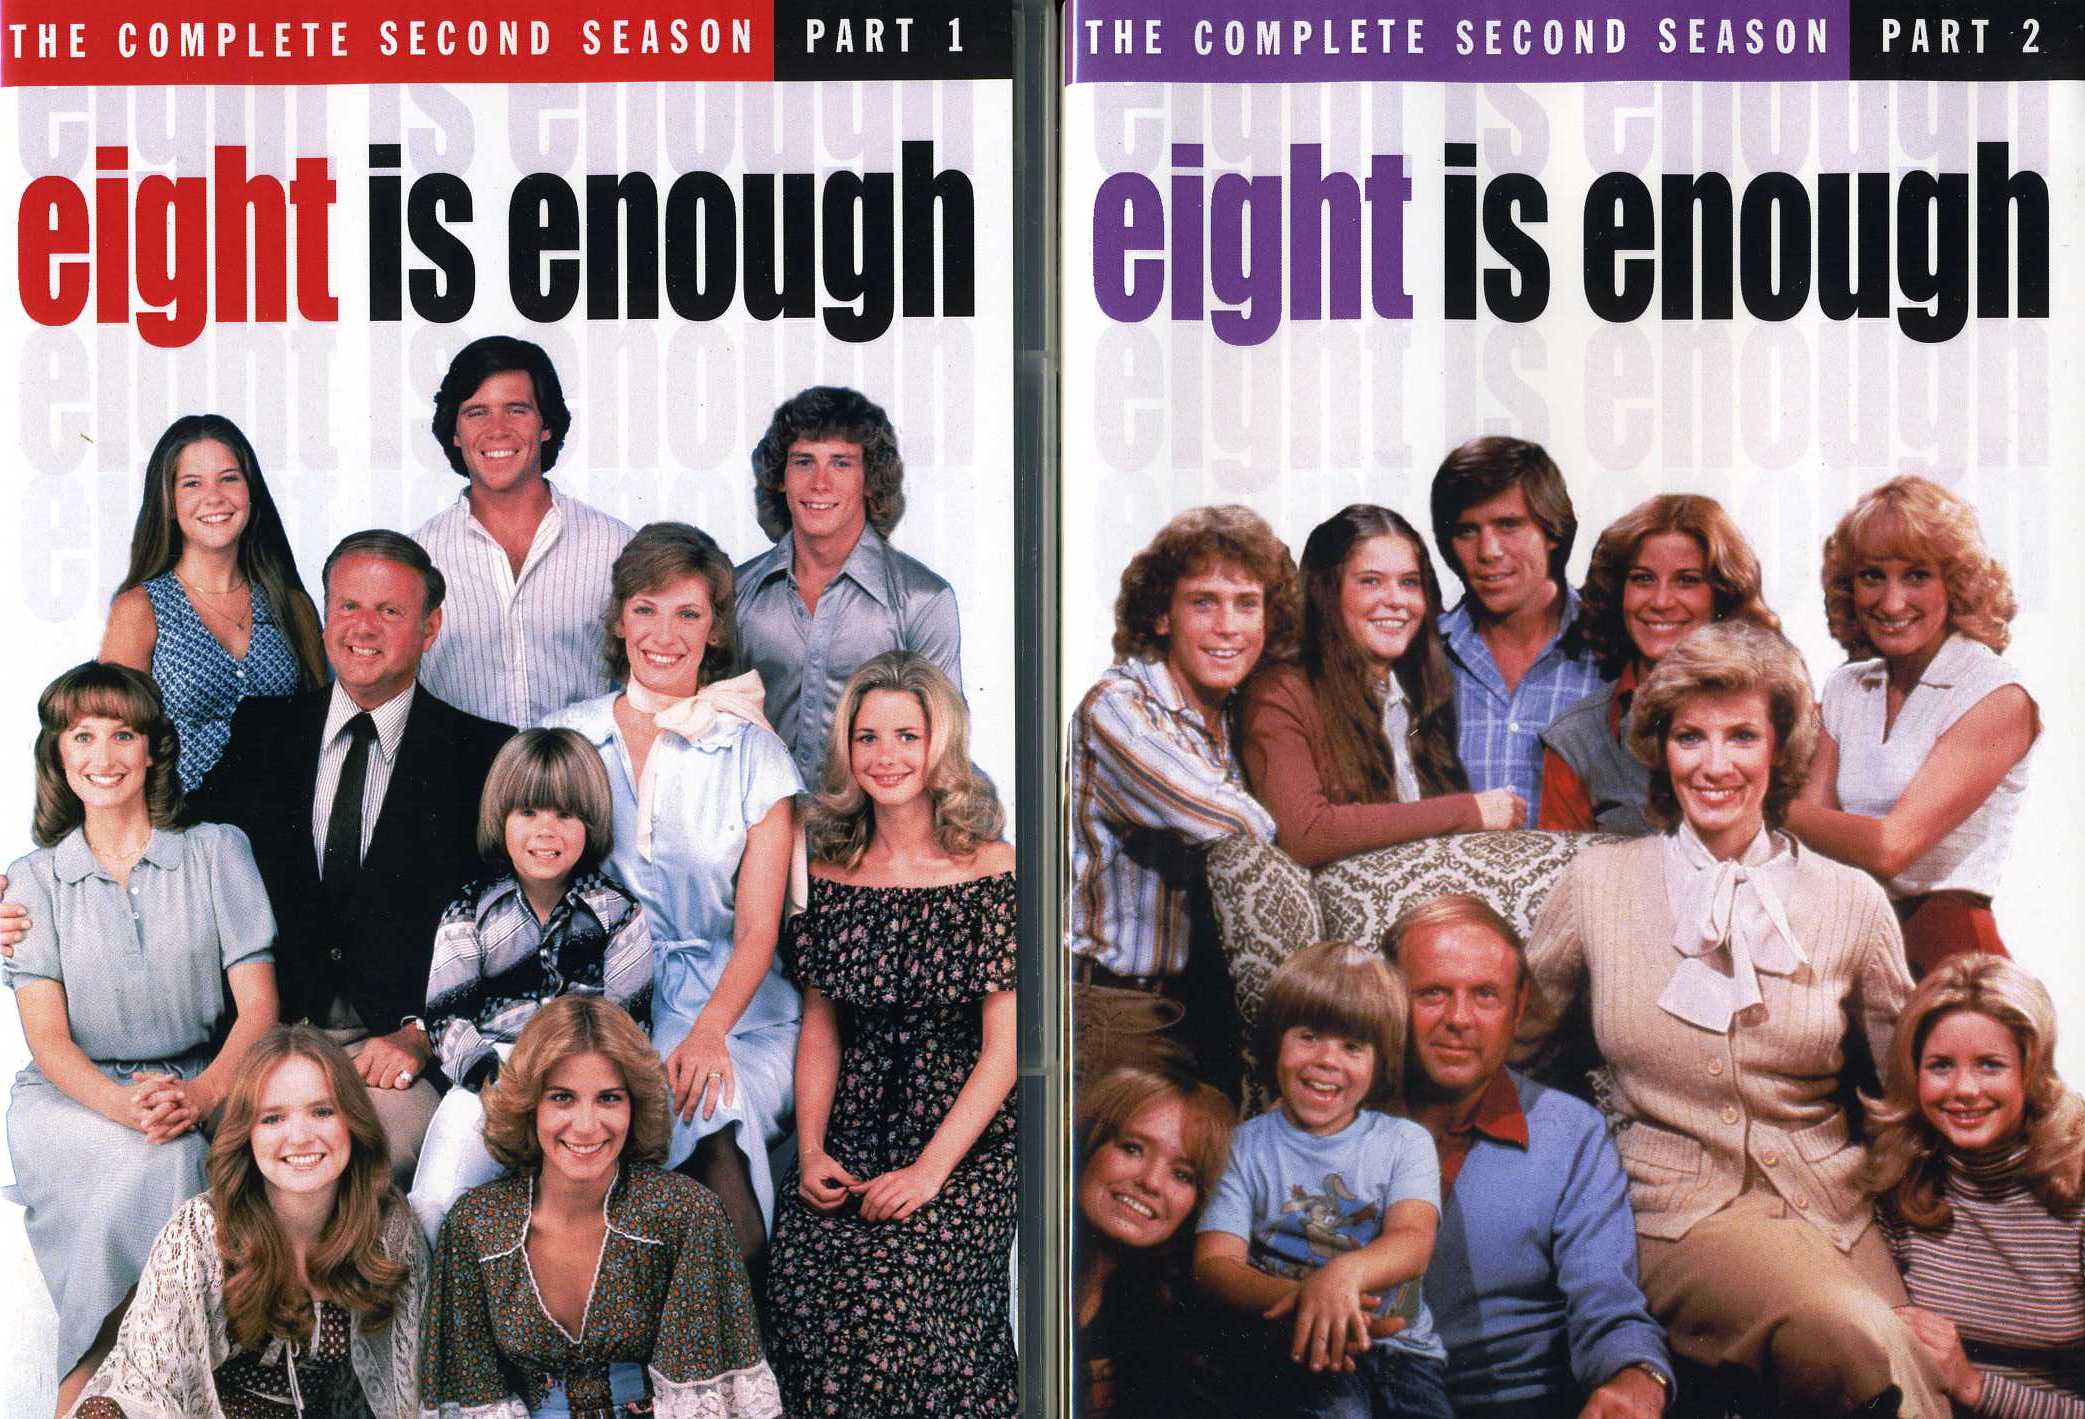 EIGHT IS ENOUGH: SEASON TWO PART 1 & PART 2 COMPLE